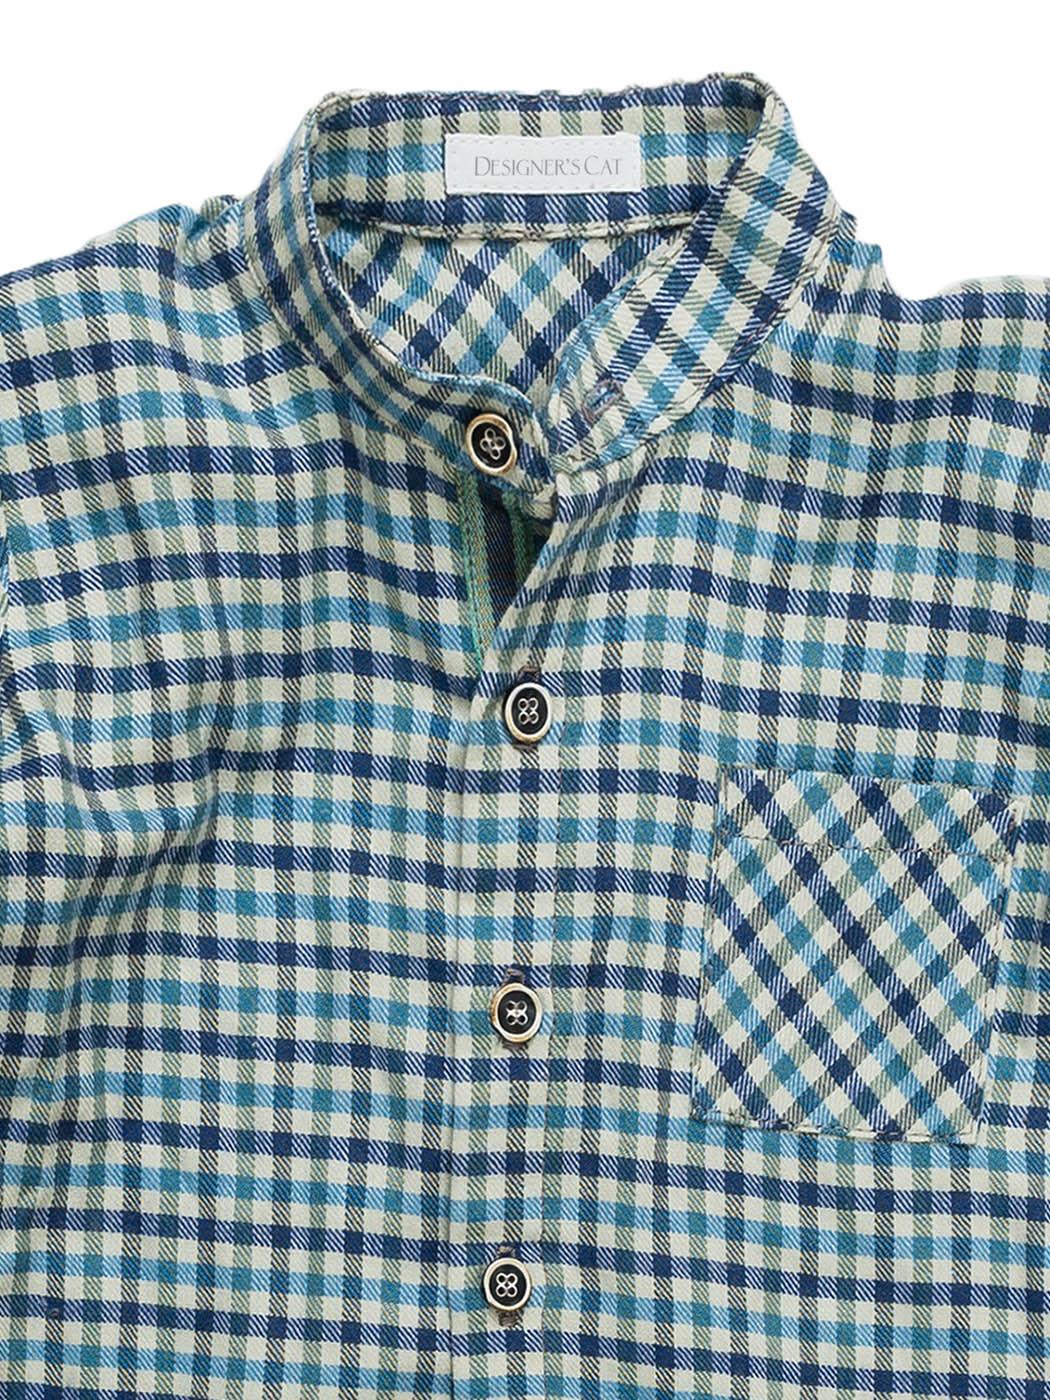 TOMMY Baby plaid shirt-50% off